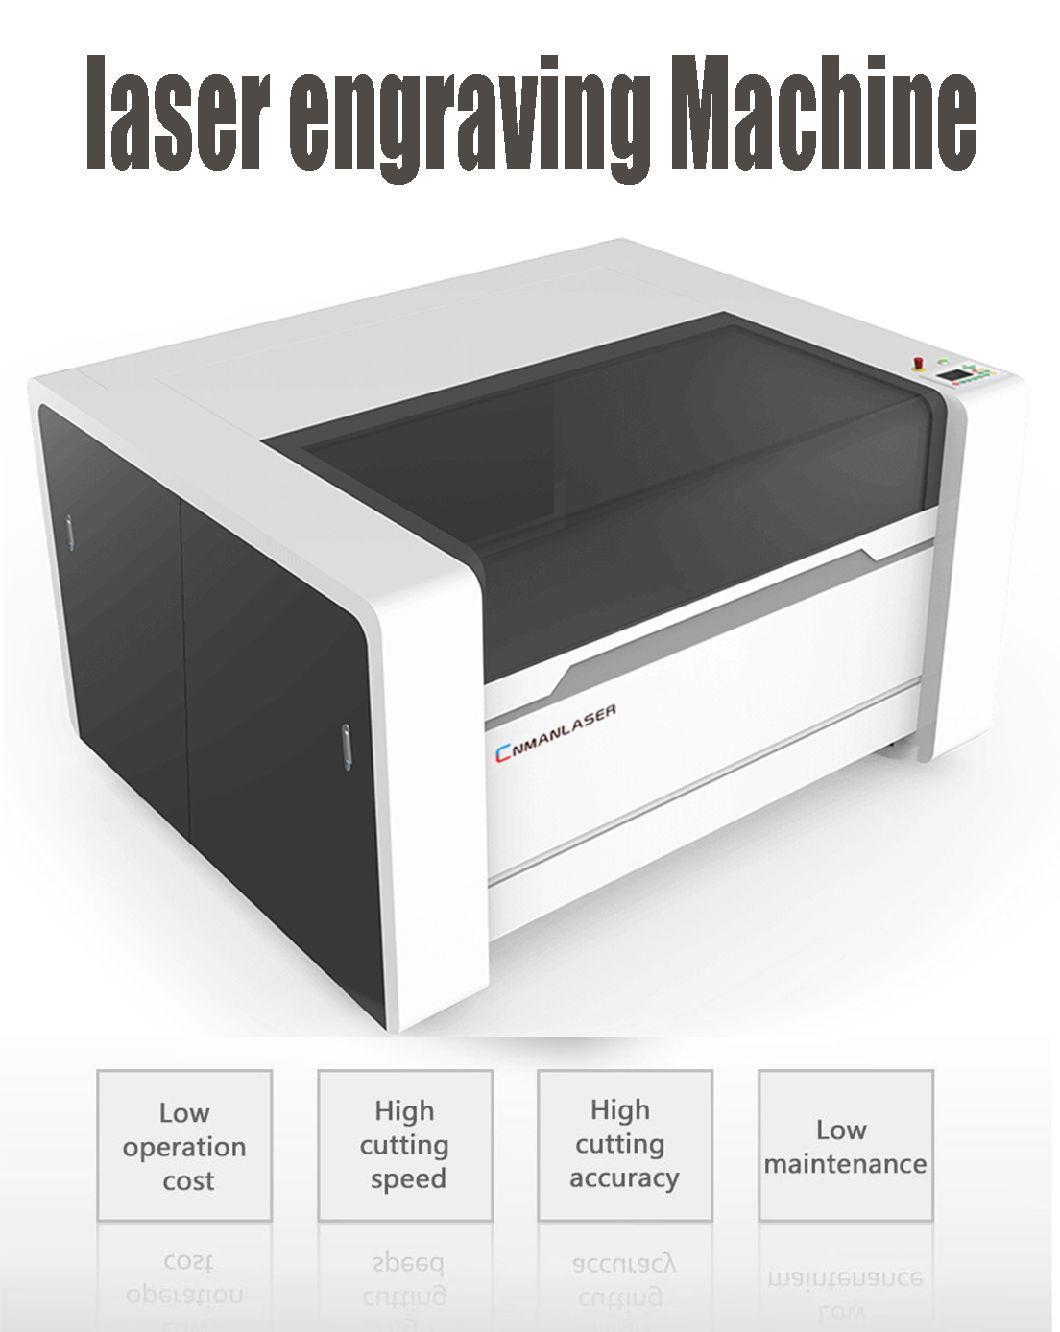 150W Ce FDA FCC 6090 9060 Laser Engraving and Cutting Machine for Advertising Acrylic Wood Leather Non-Metallic